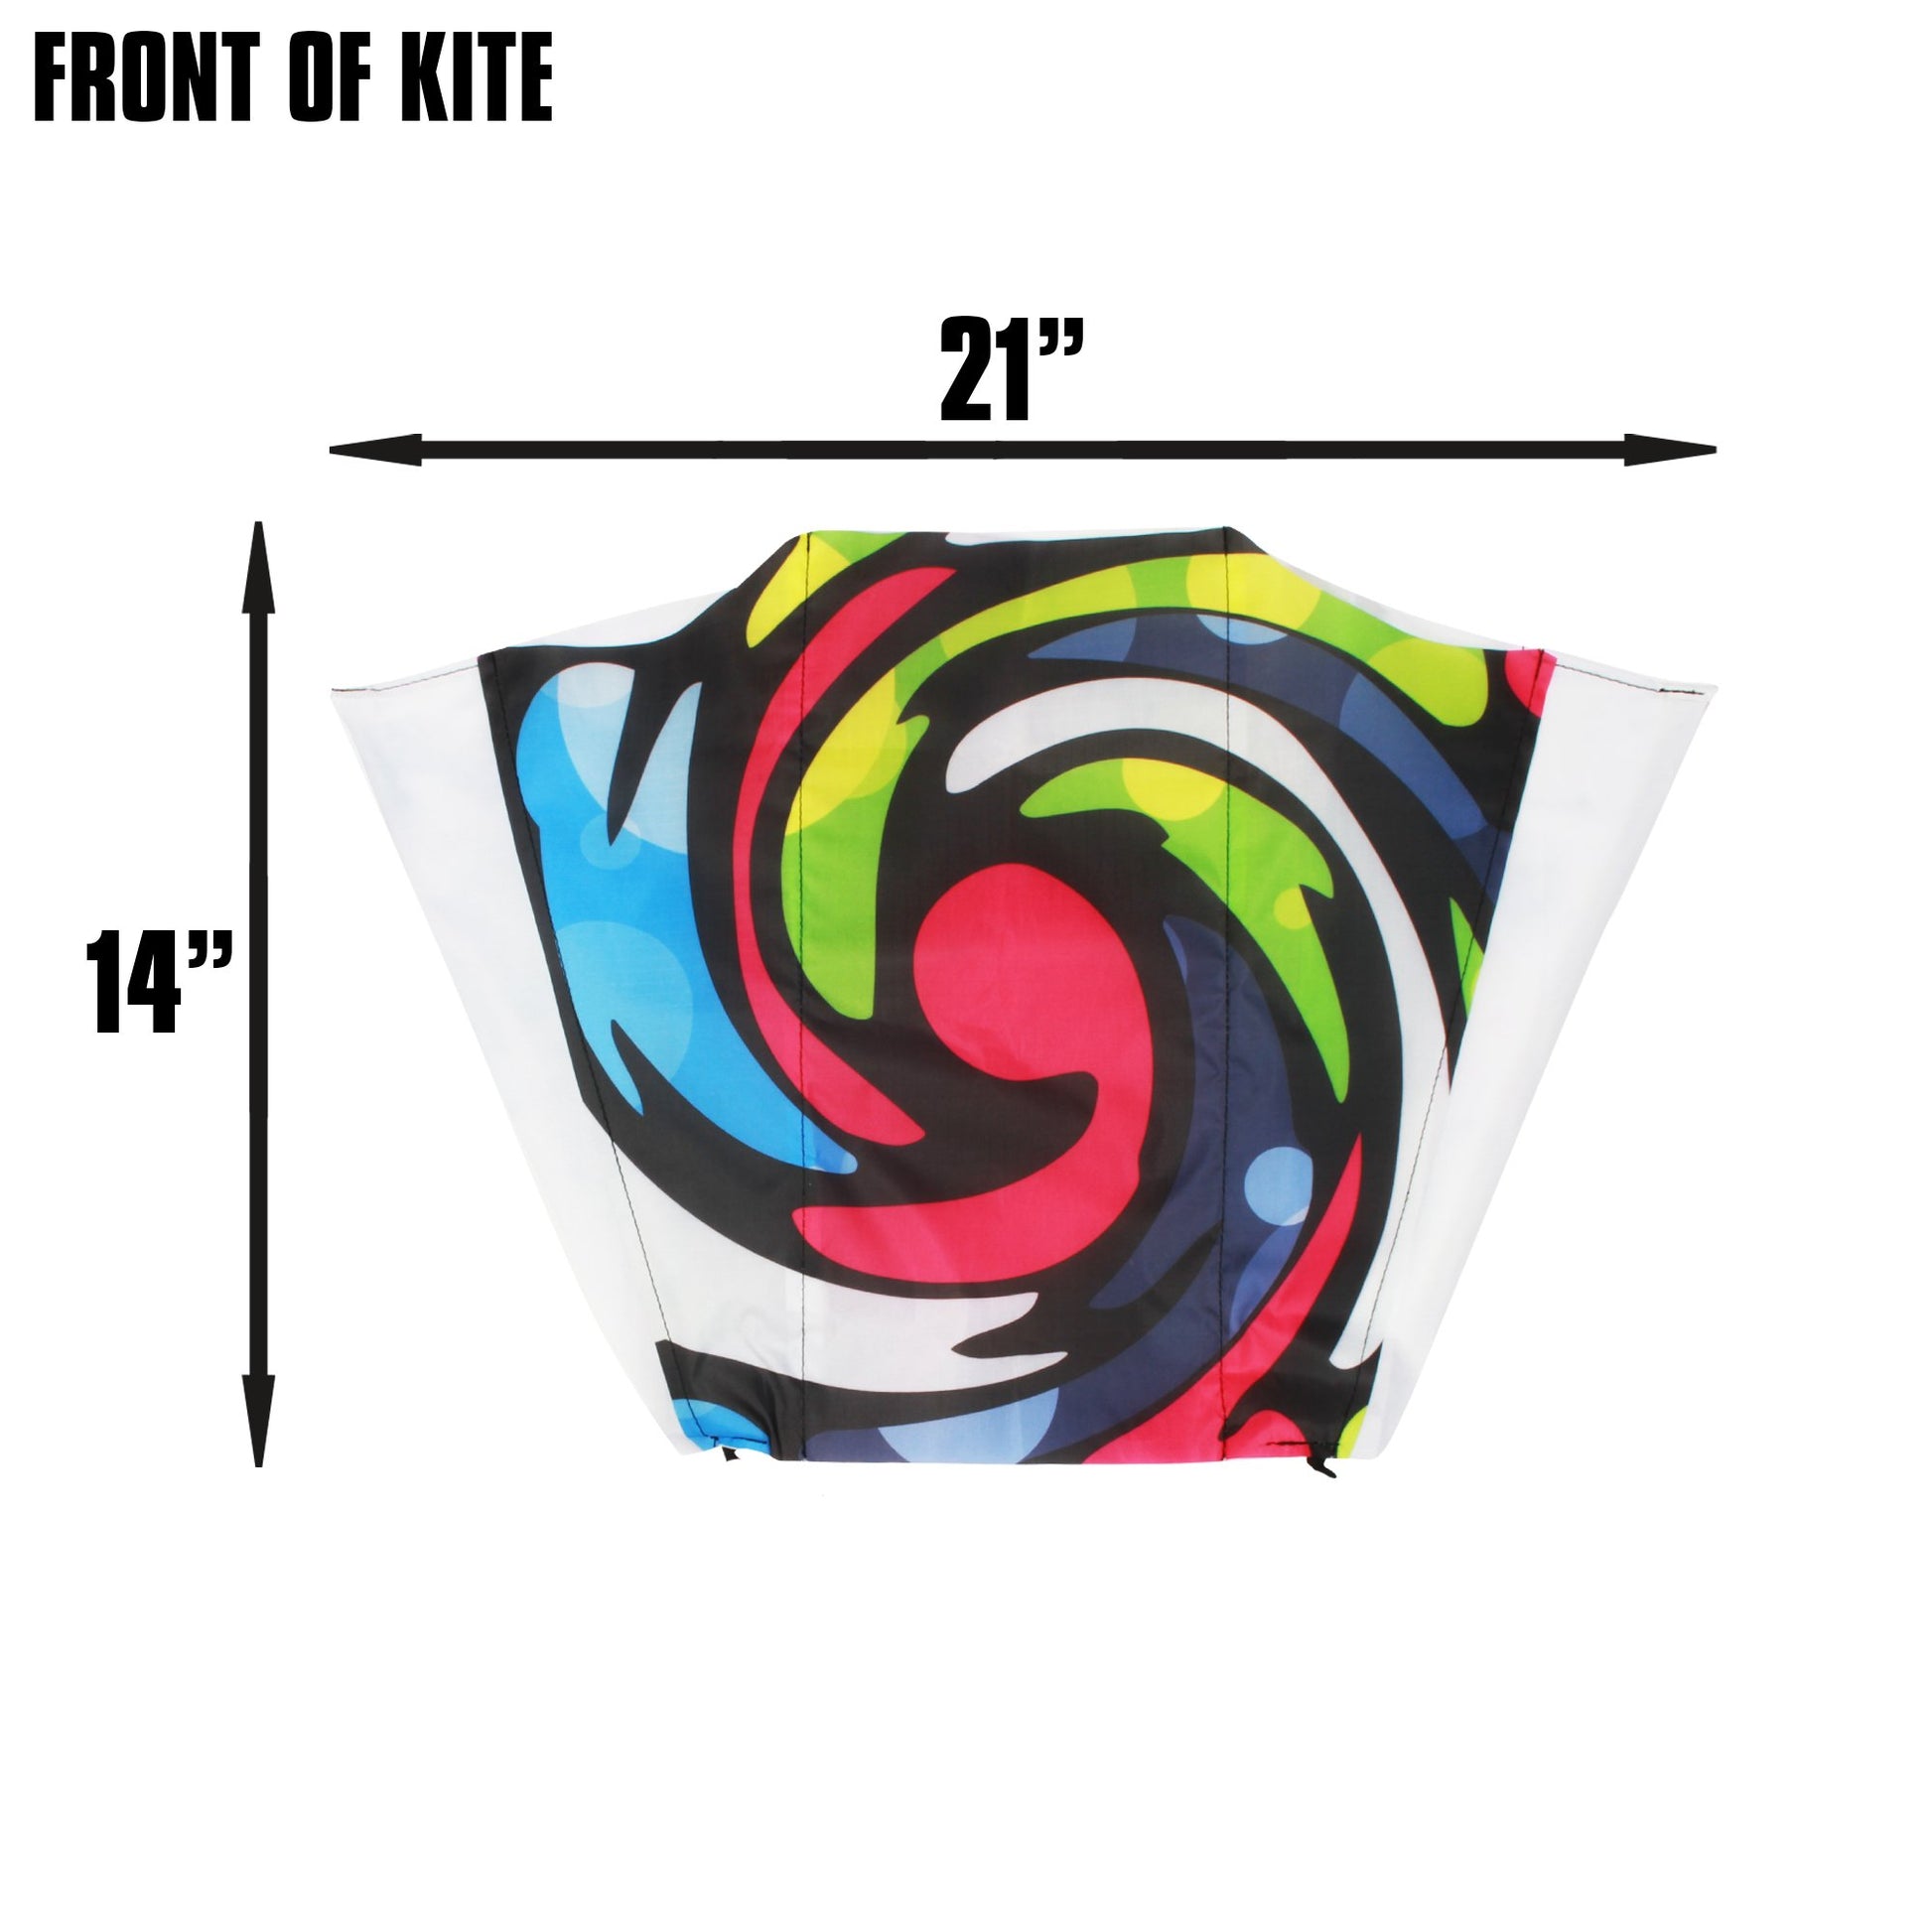 X Kites SkyFoil Waves + Pocket Kite Void Parafoil Kite Bundle - No Assembly Required photo of product in use